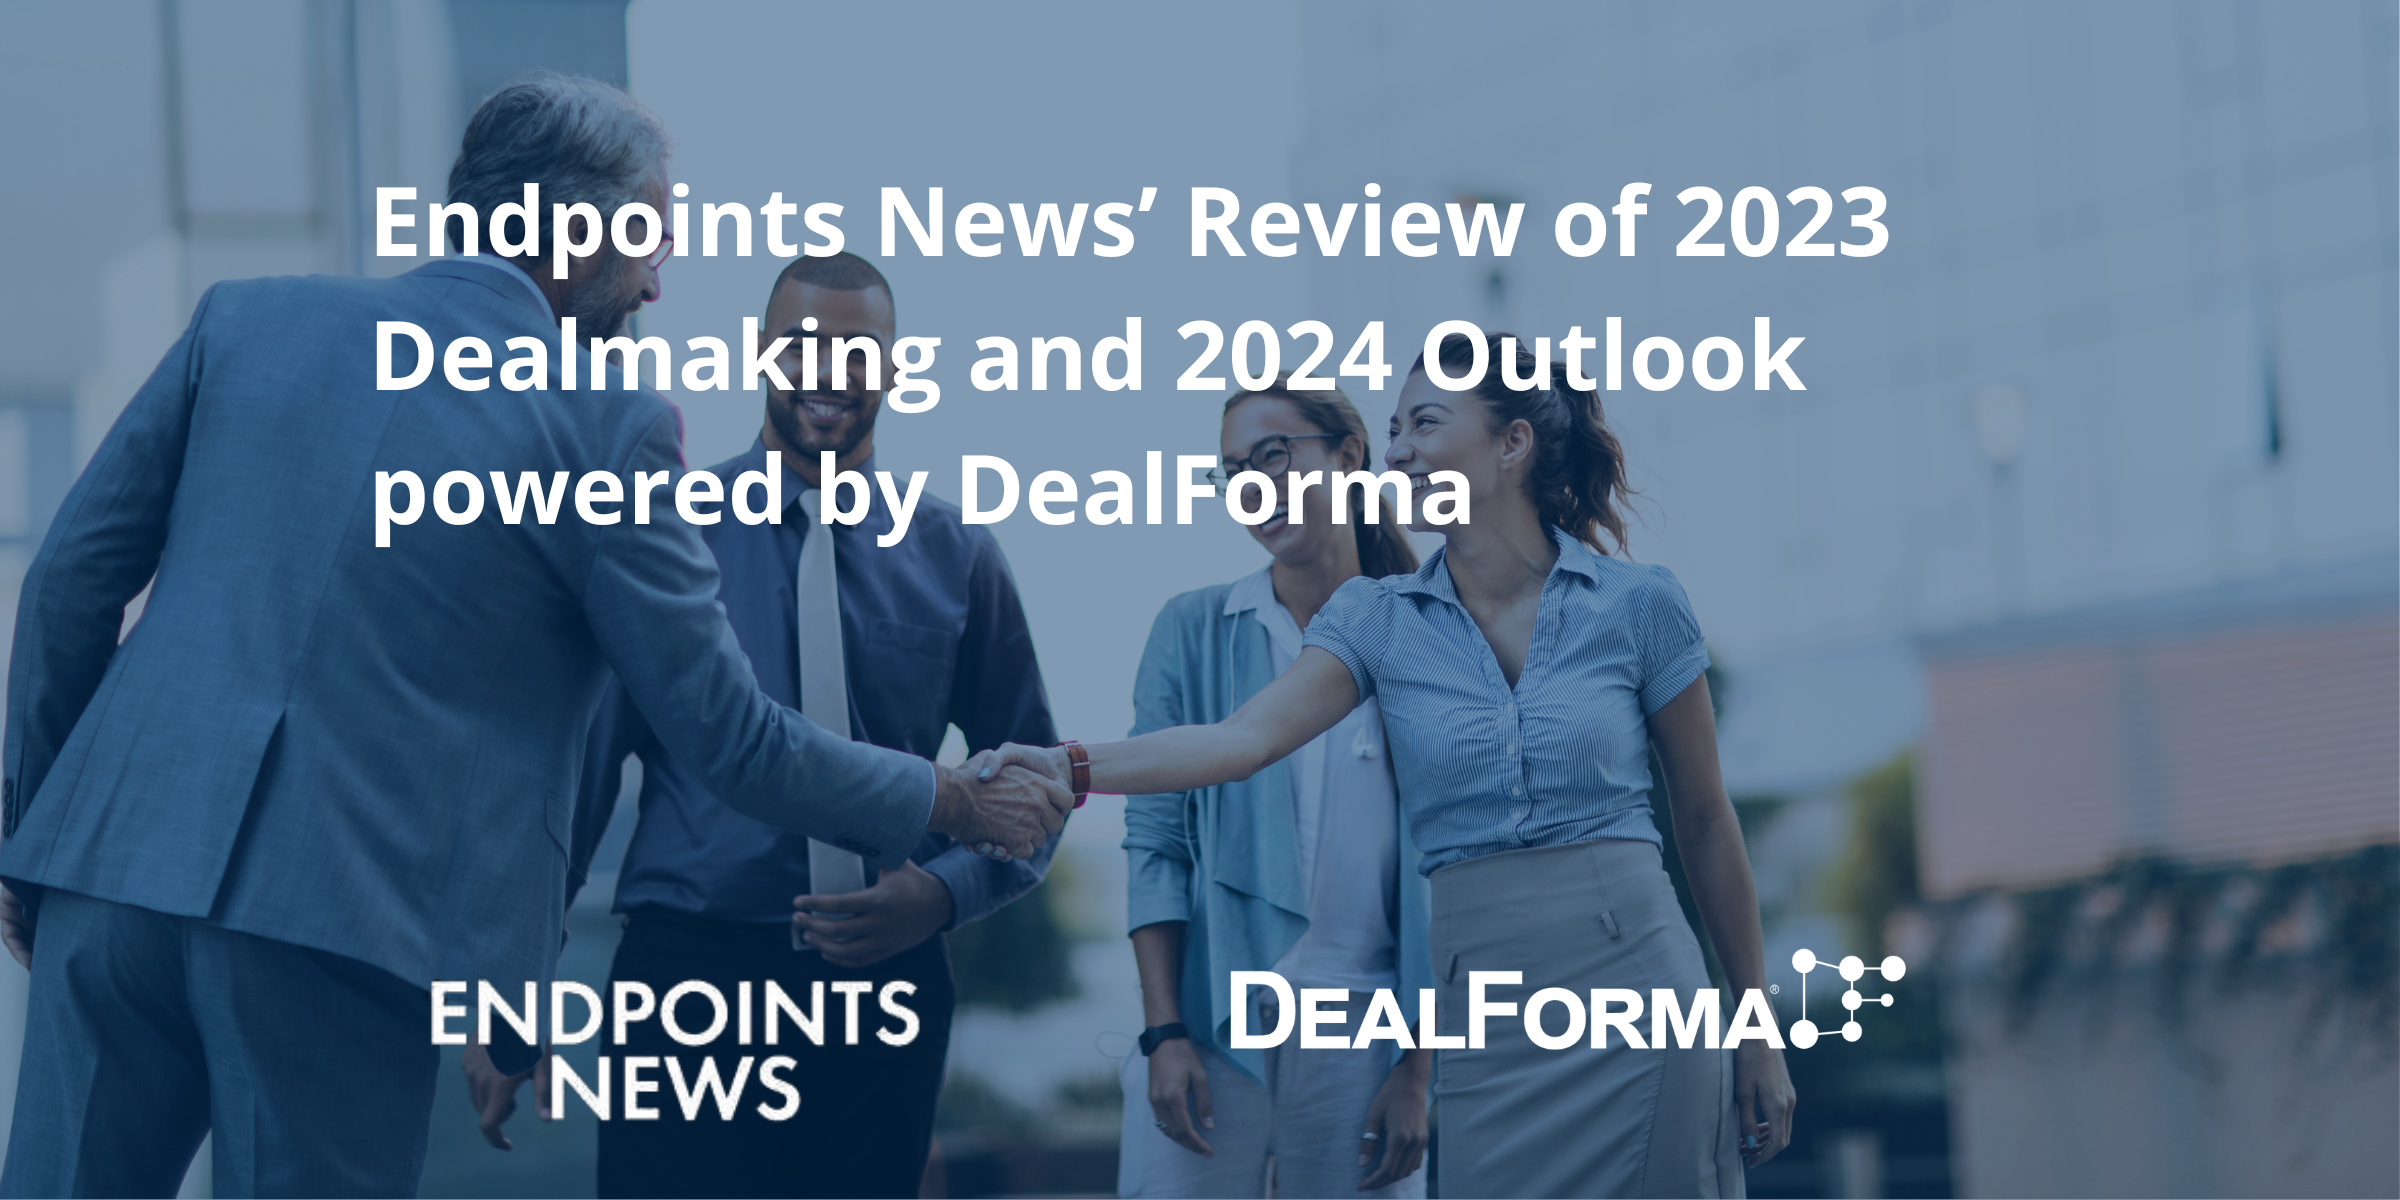 Endpoints News’ Review of 2023 Dealmaking and 2024 Outlook powered by DealForma